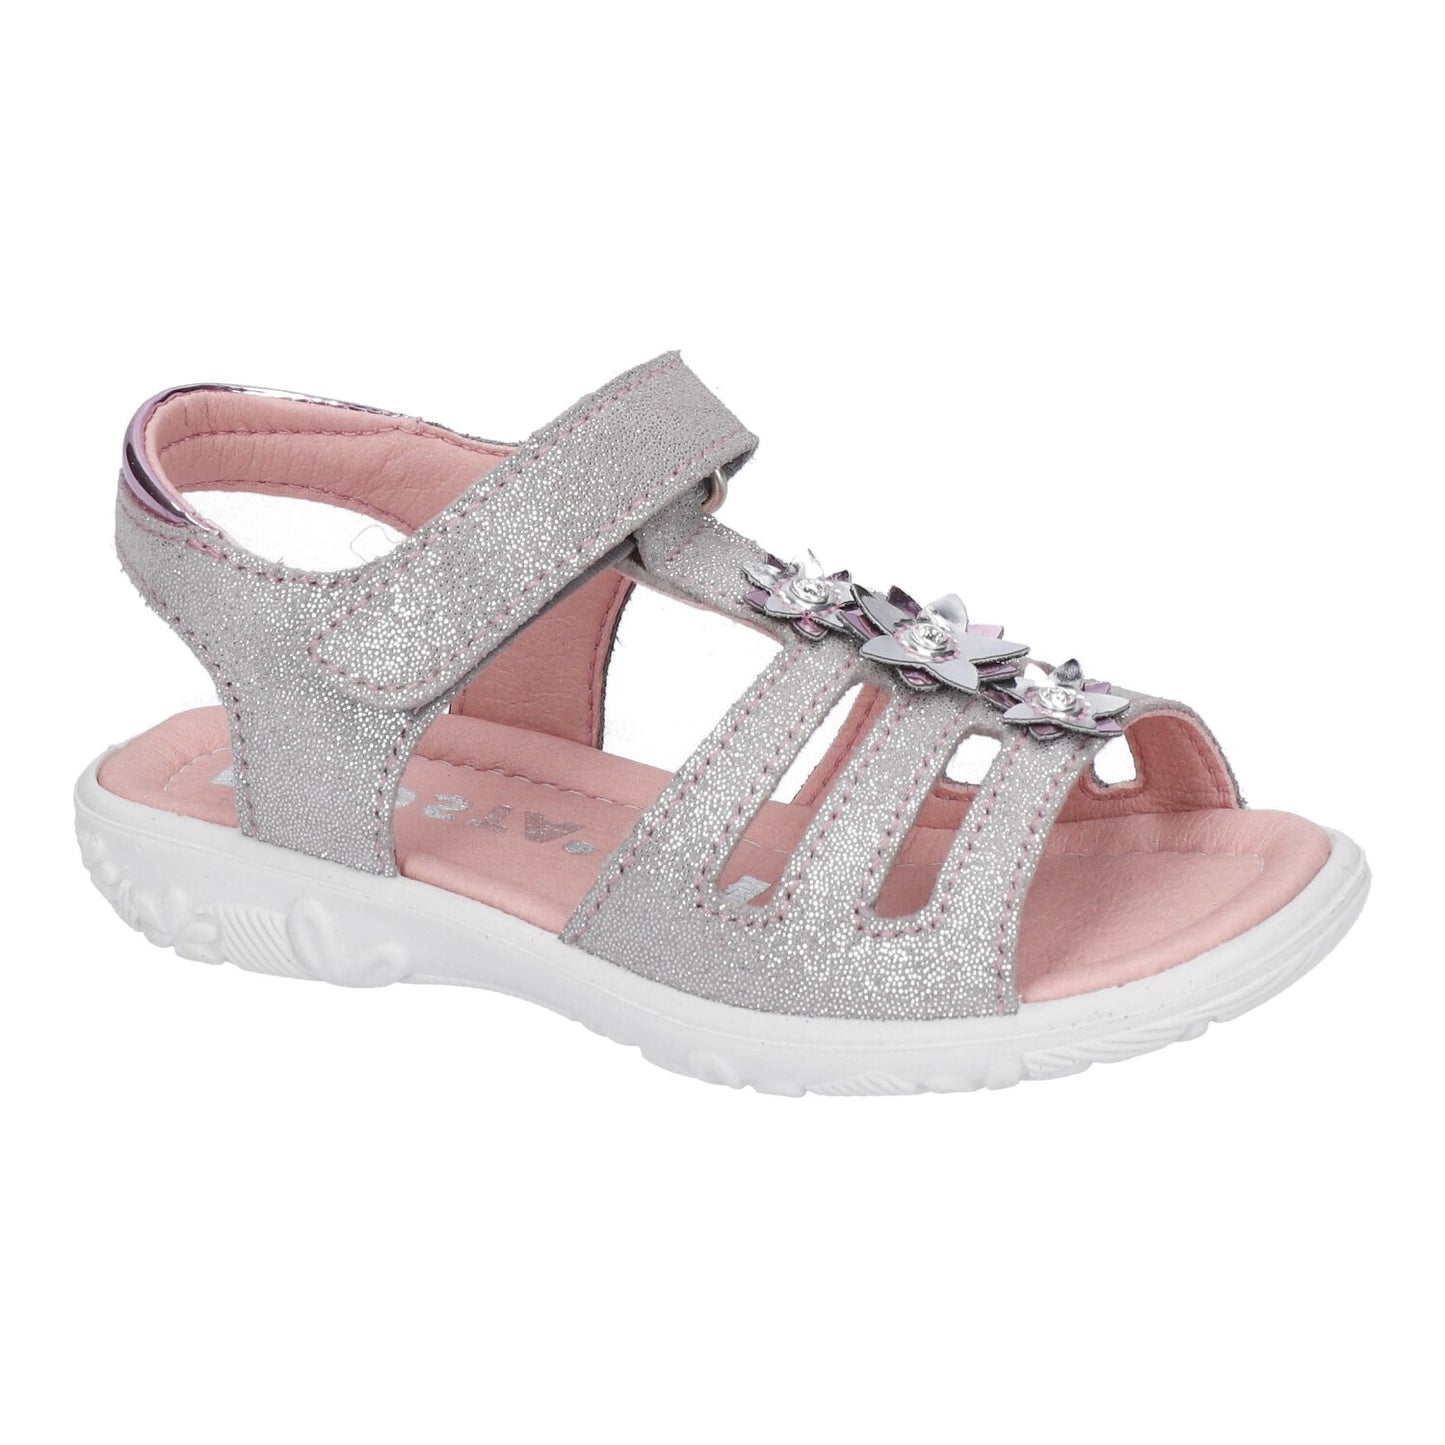 A girls open toe sandal by Ricosta,style Cleo, in silver leather with velcro fastening. Right side view.